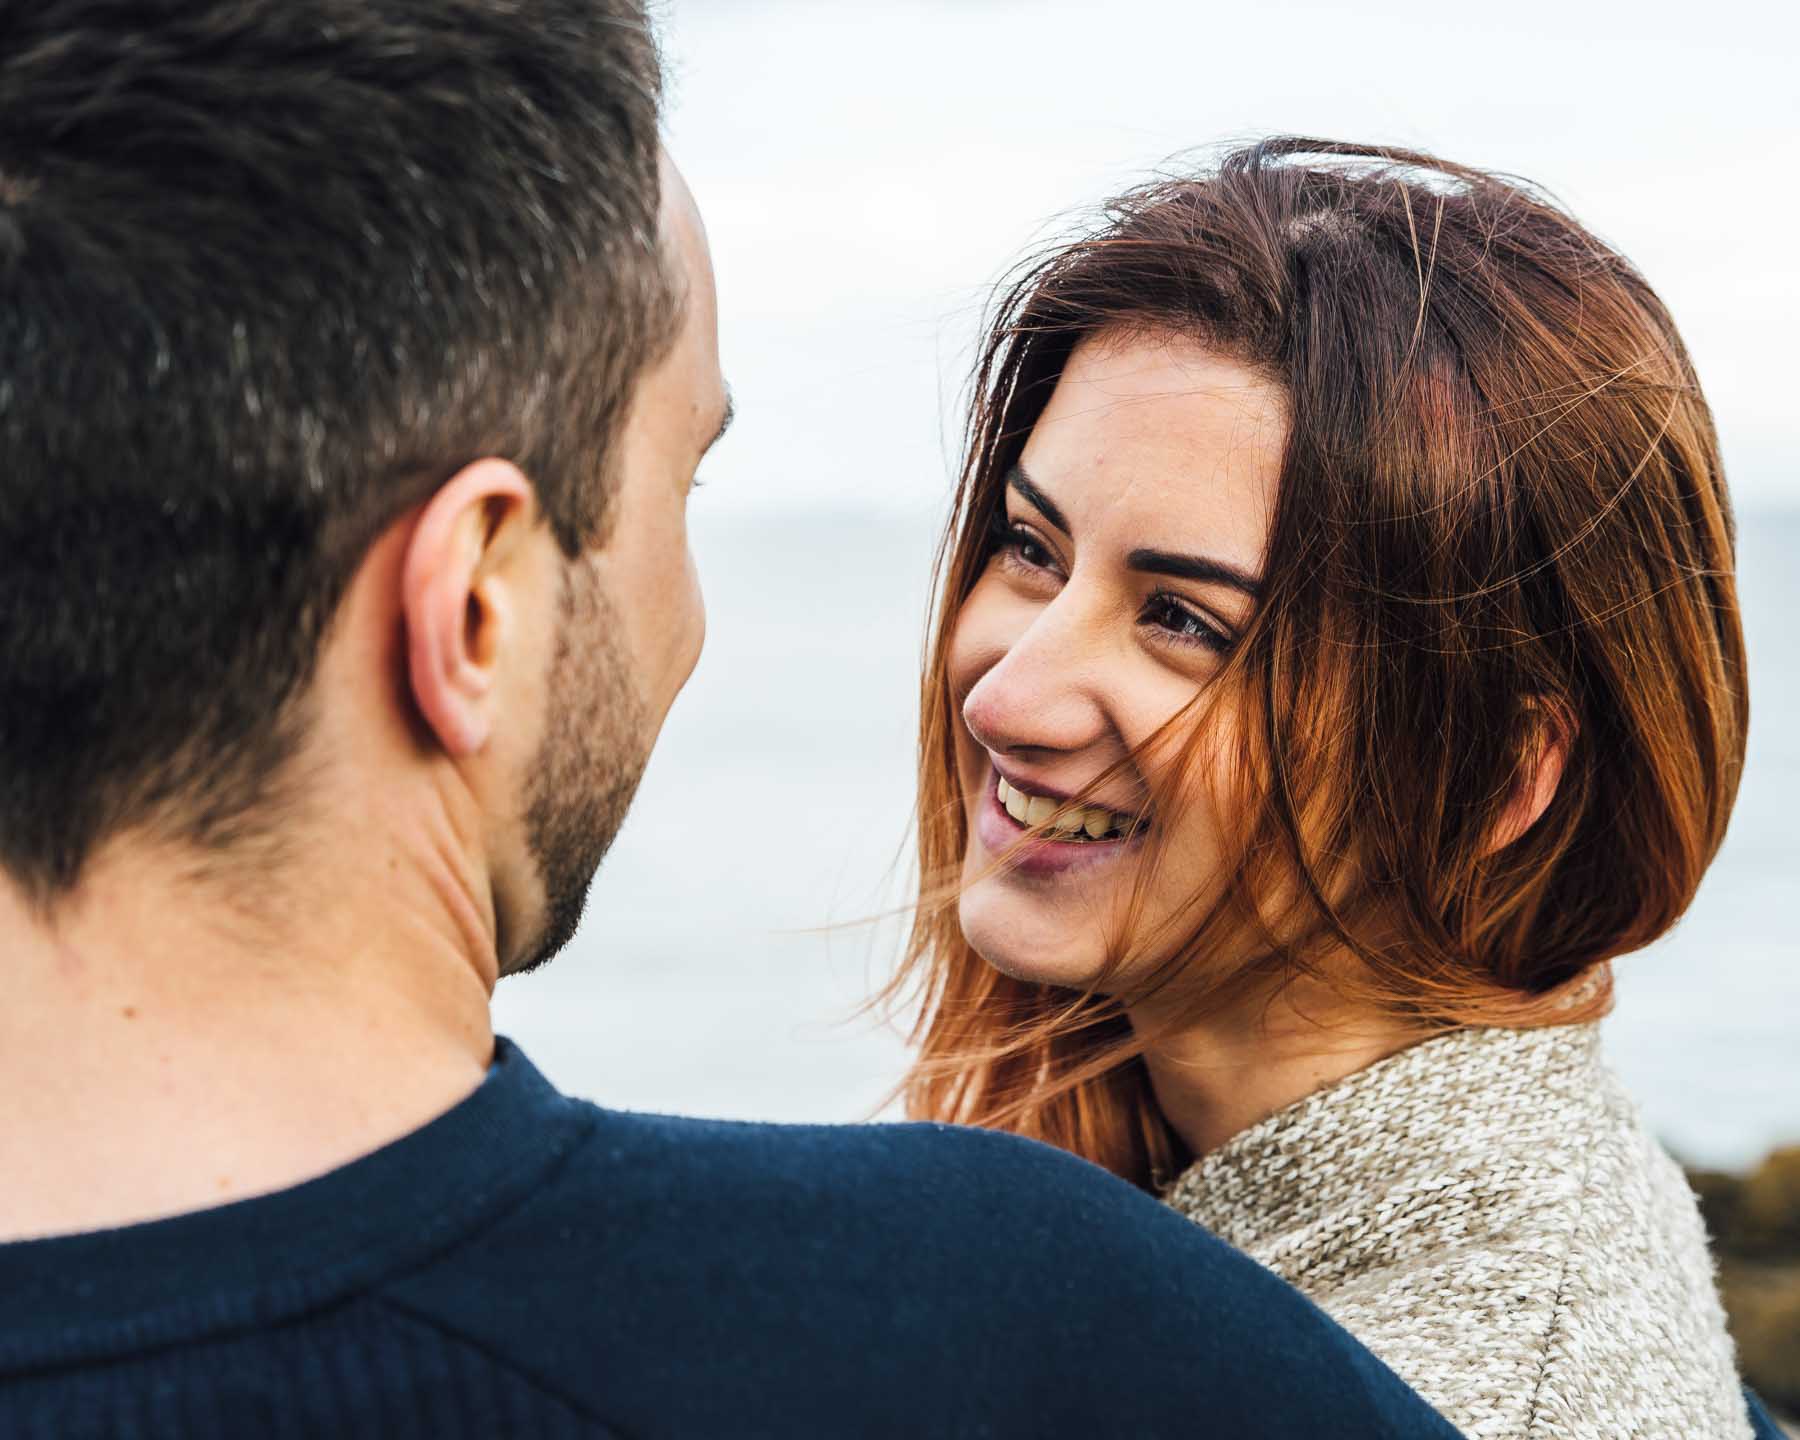 Smiling girl looks into the eyes of her boyfriend